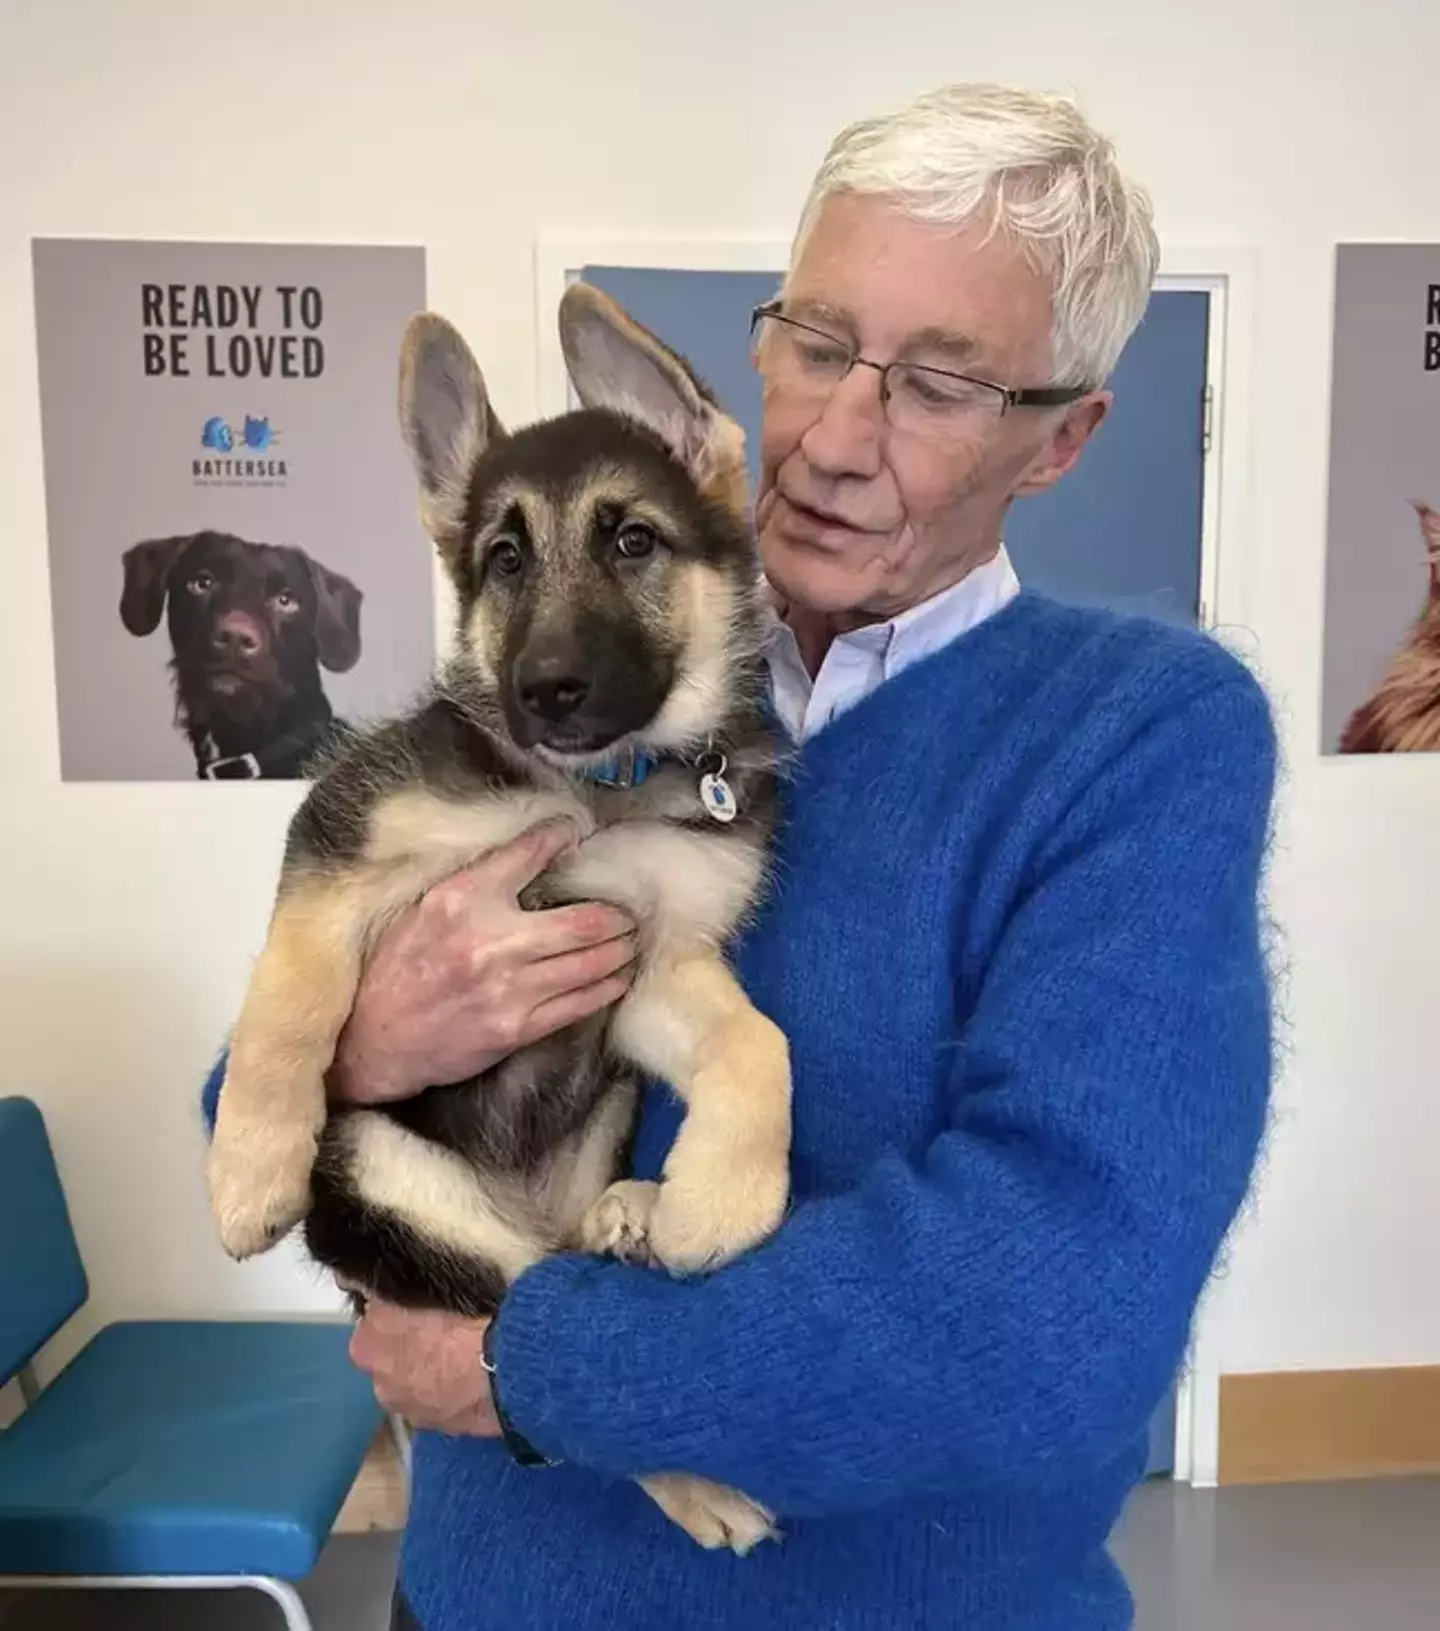 Paul O'Grady was well known for his love of animals, especially dogs.